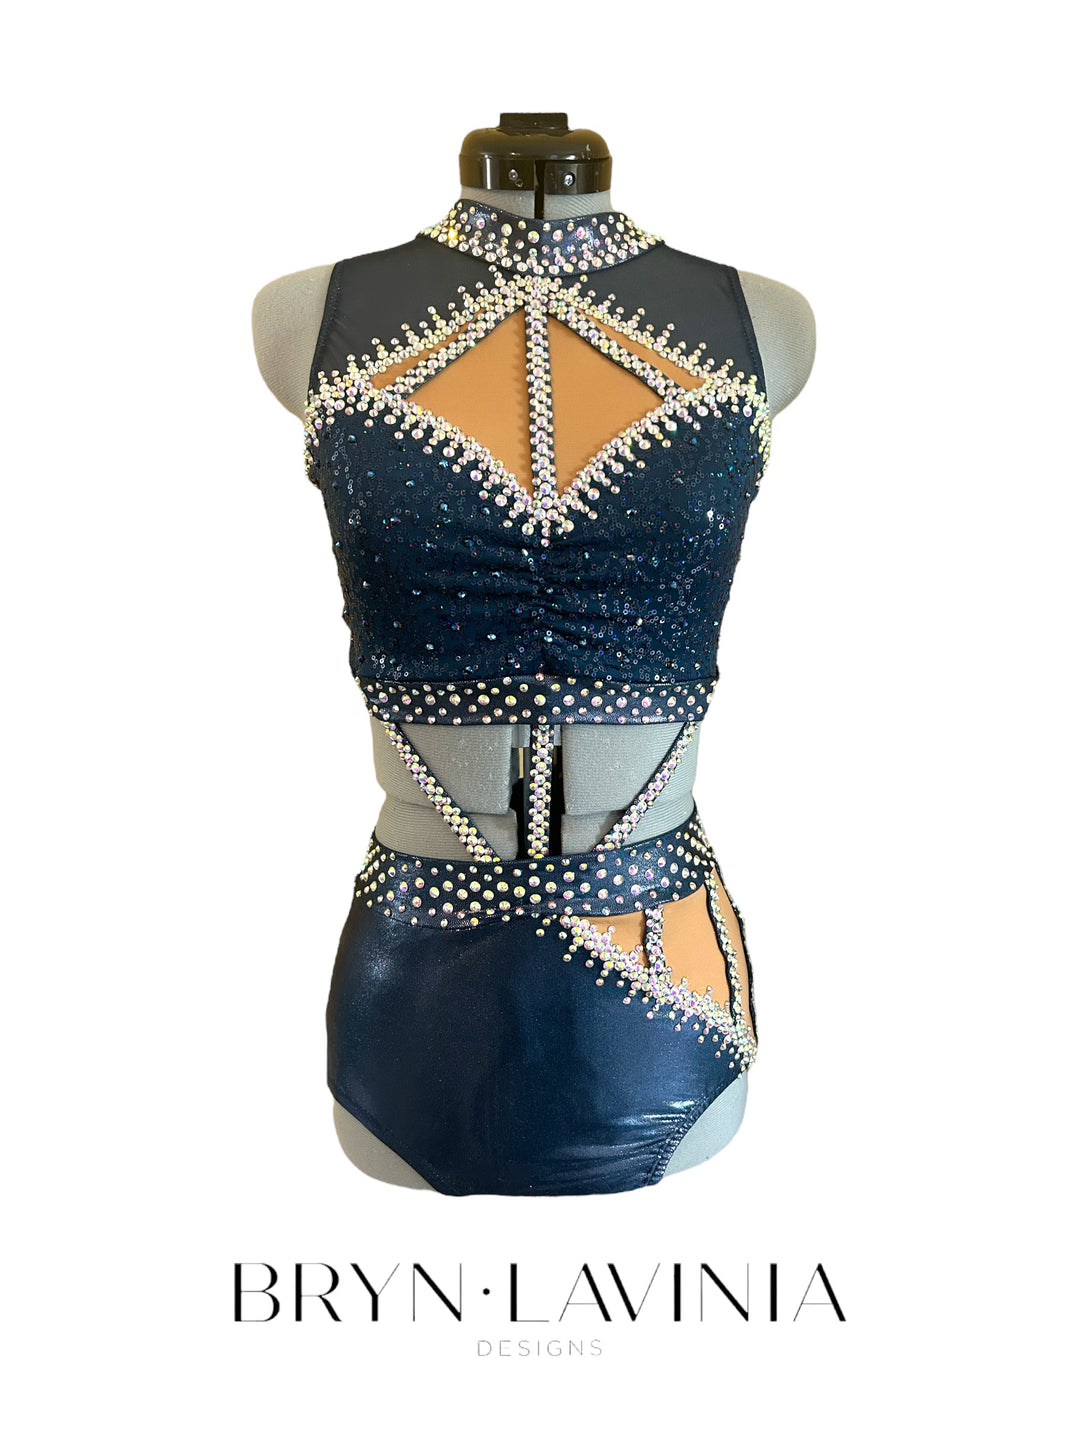 NEW Adult Small metallic blue ready to ship costume